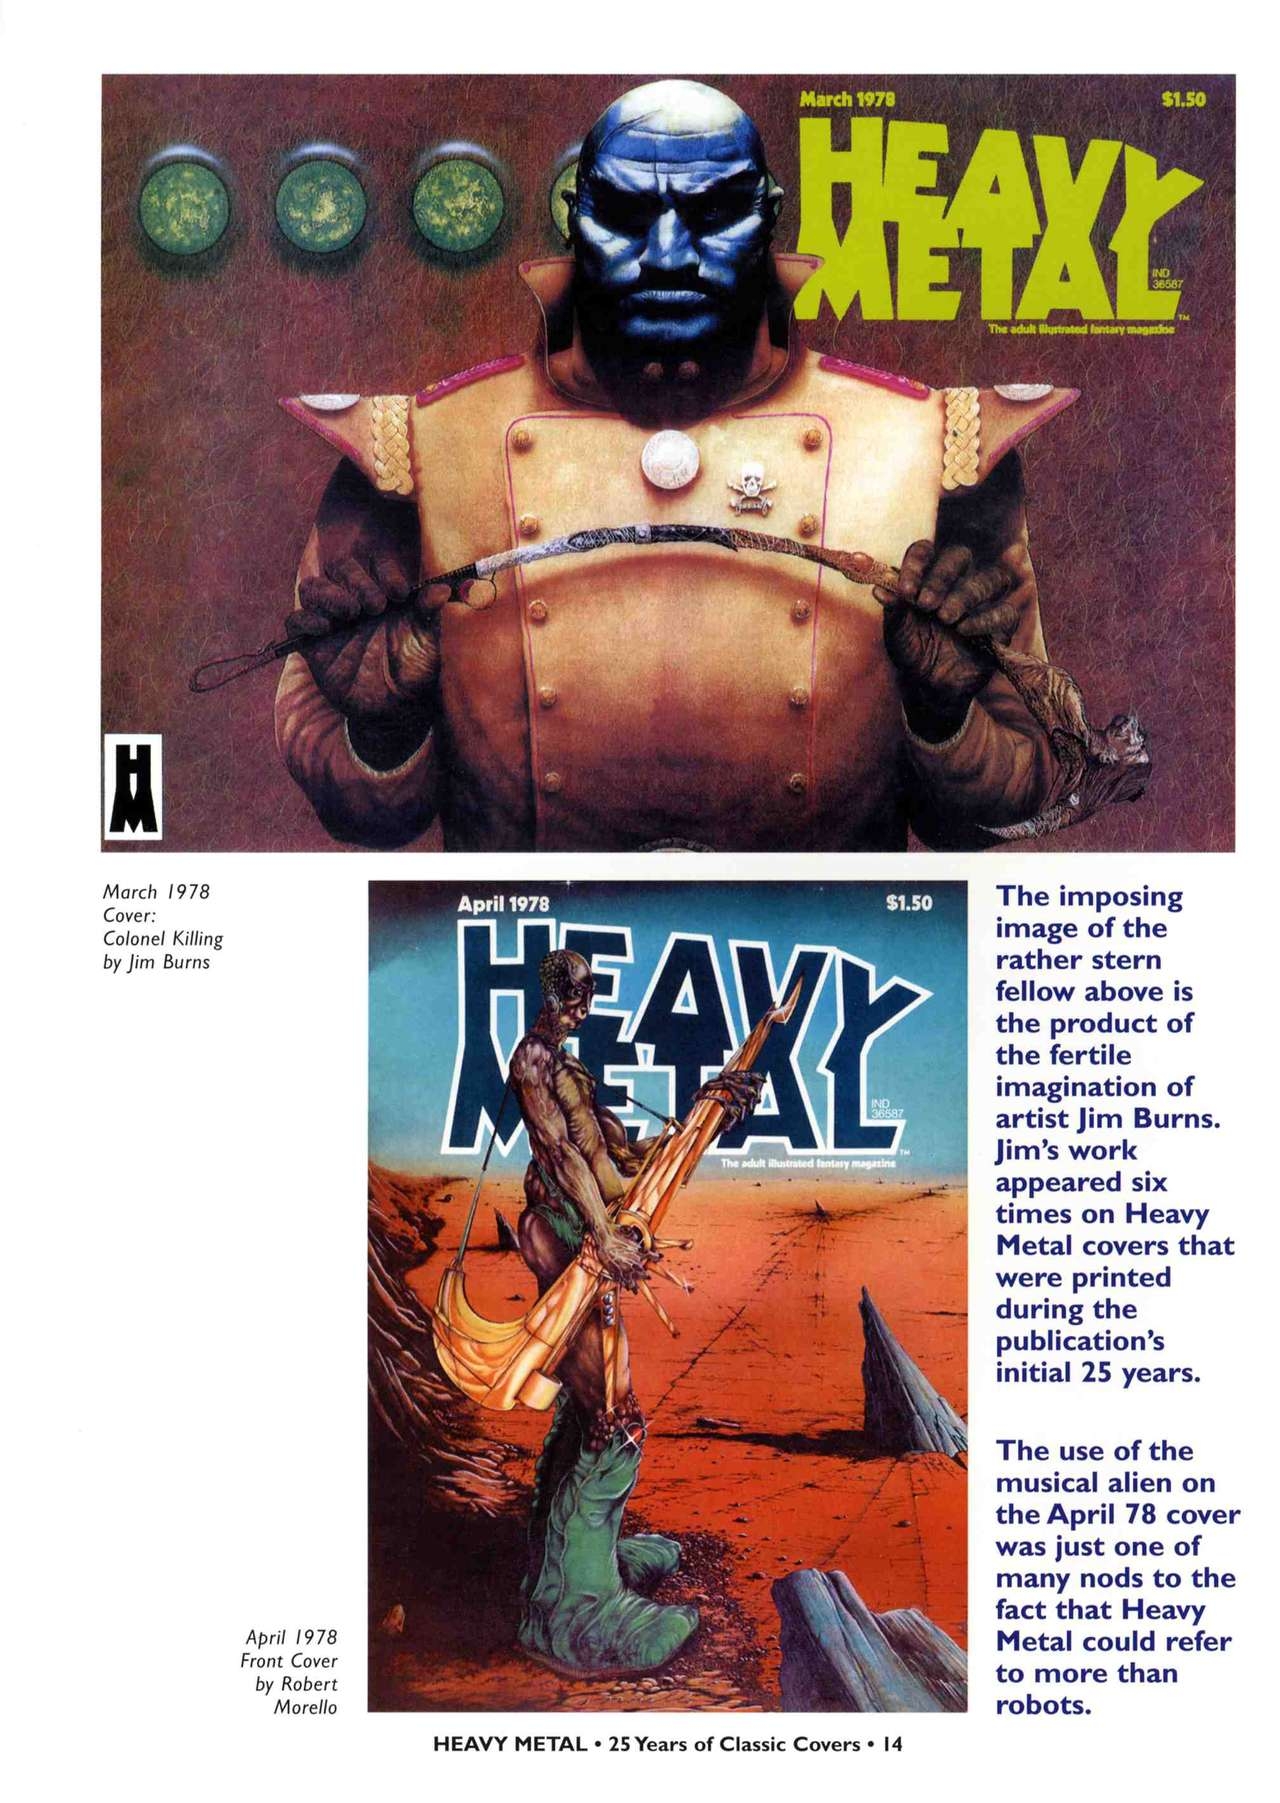 HEAVY METAL 25 Years of Classic Covers 19